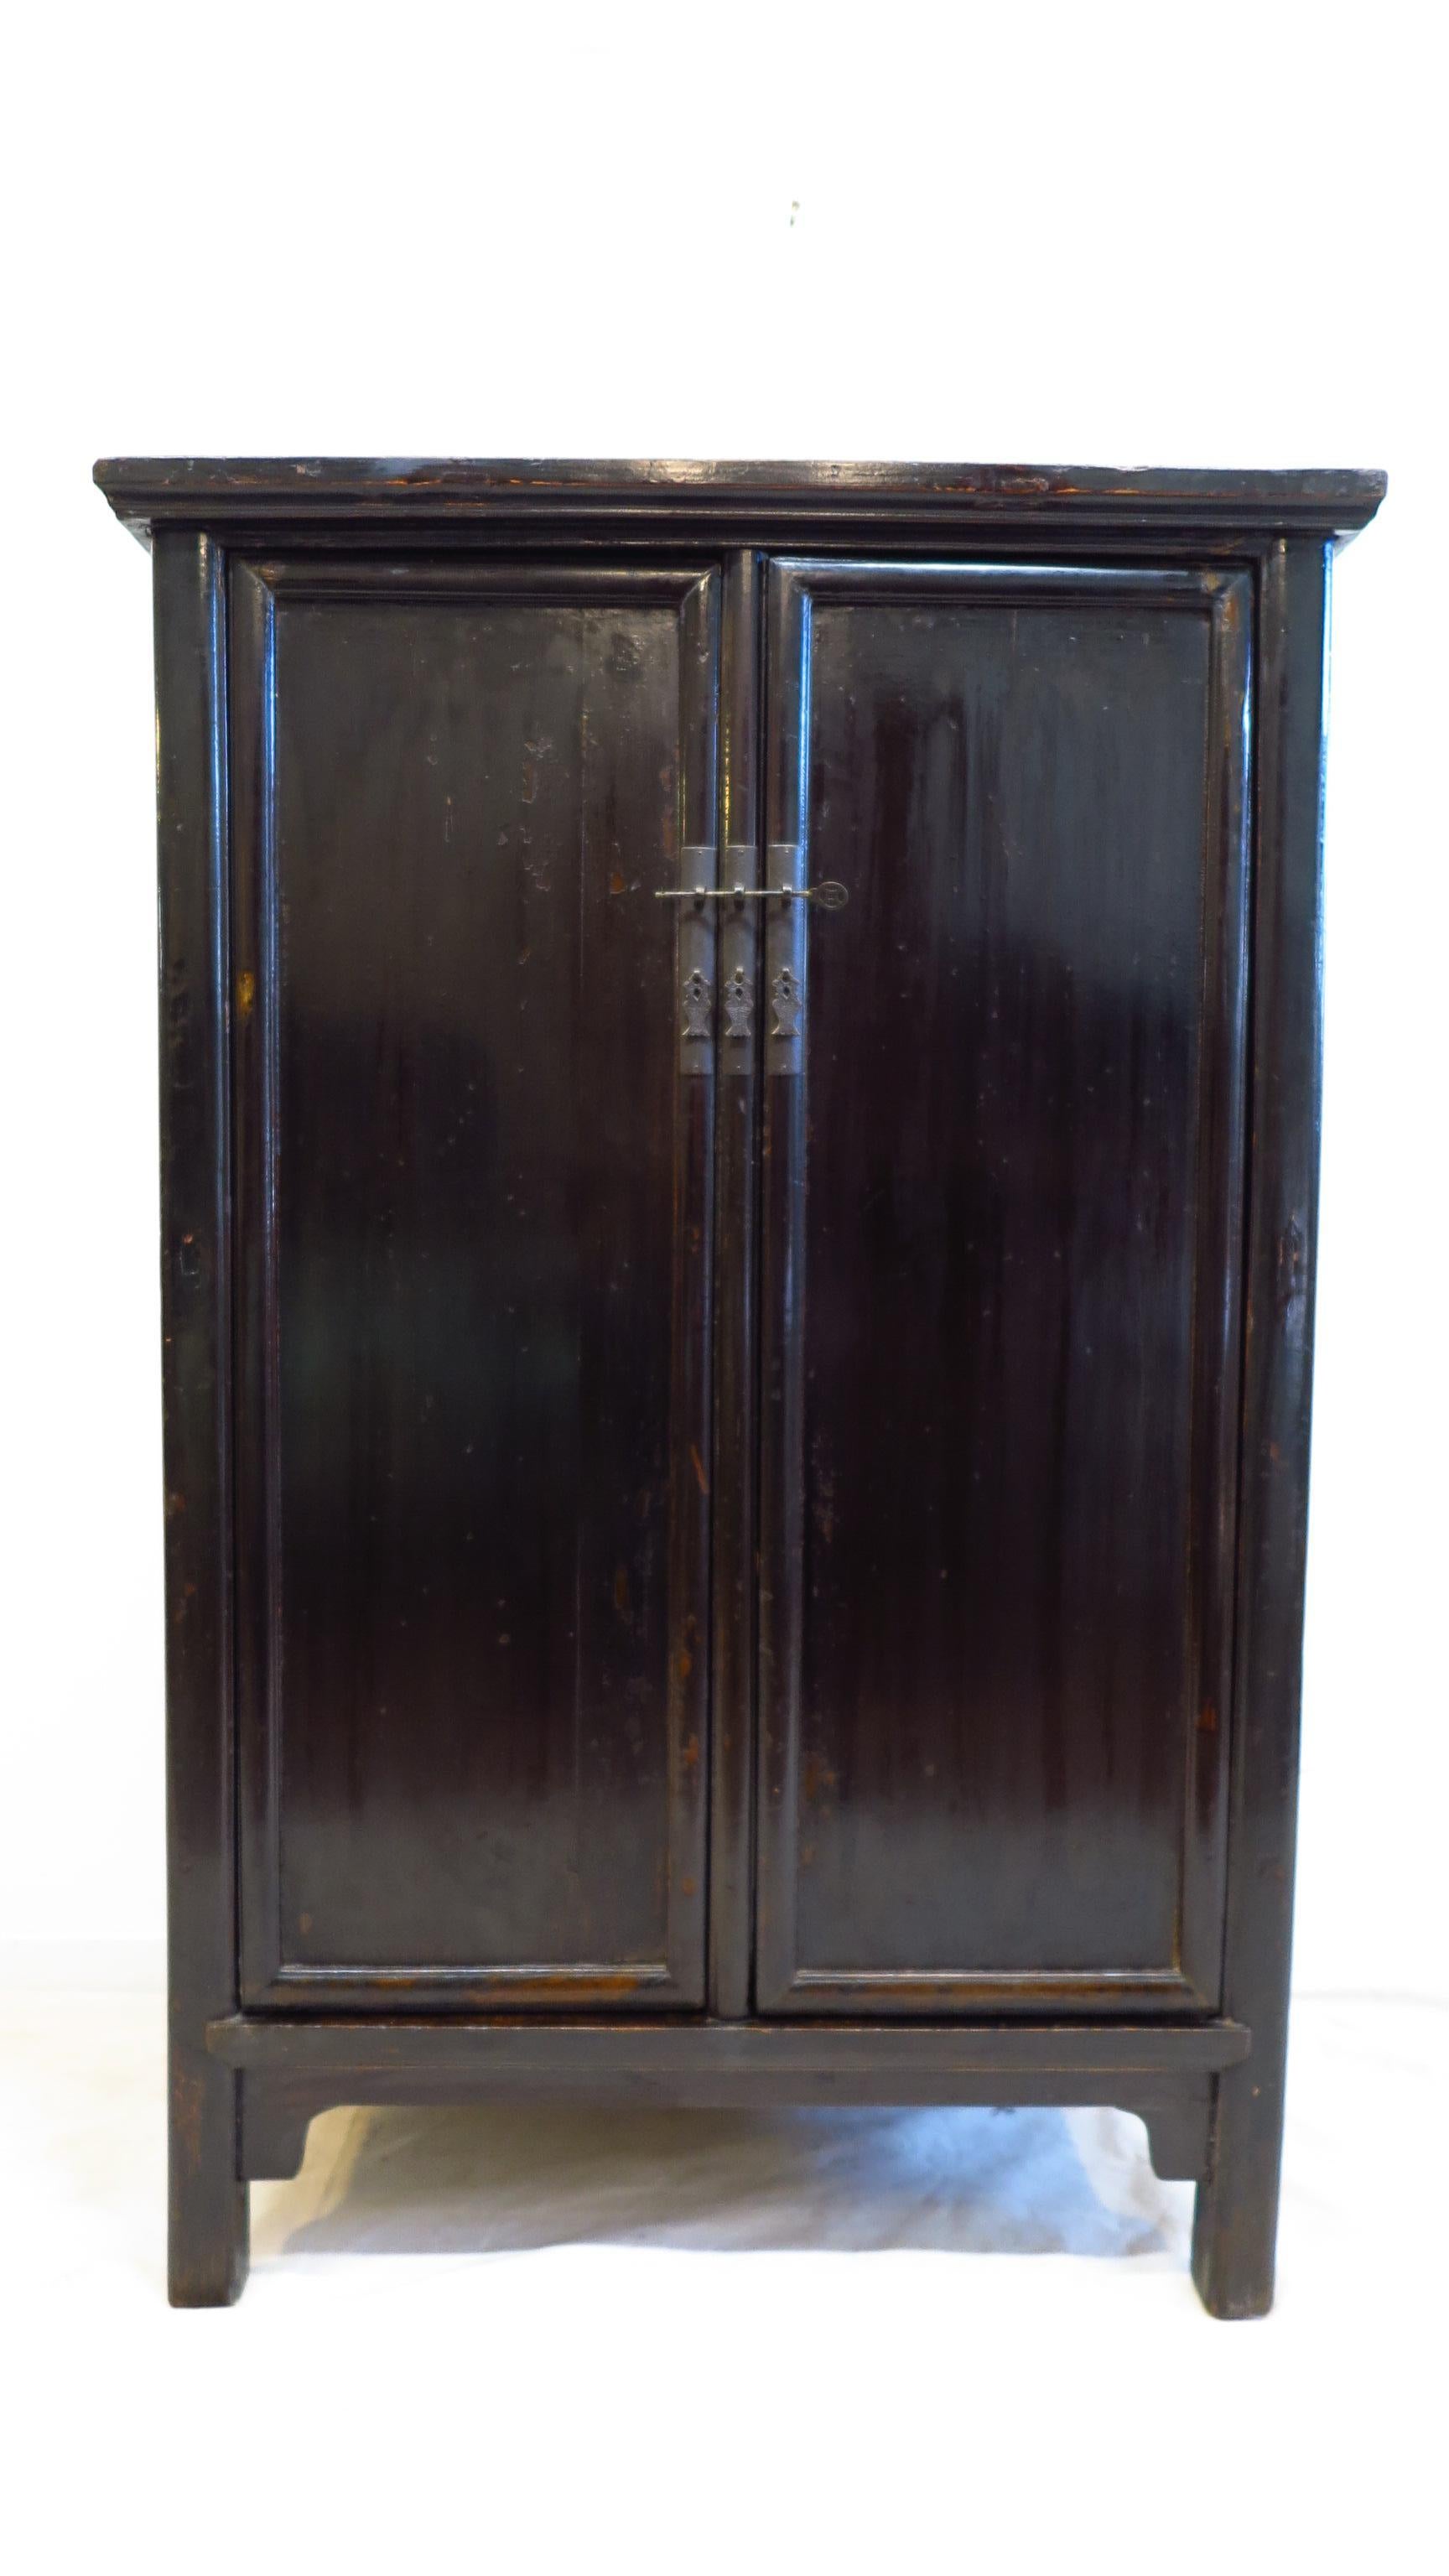 19th century black lacquer Chinese cabinet. Referred to as a Chinese round corner cabinet, also a book cabinet. Wood hinged doors with a removable center stile. Two drawers inside with shelf space of 21H top and 19H bottom. Shandong, 1830-1850.